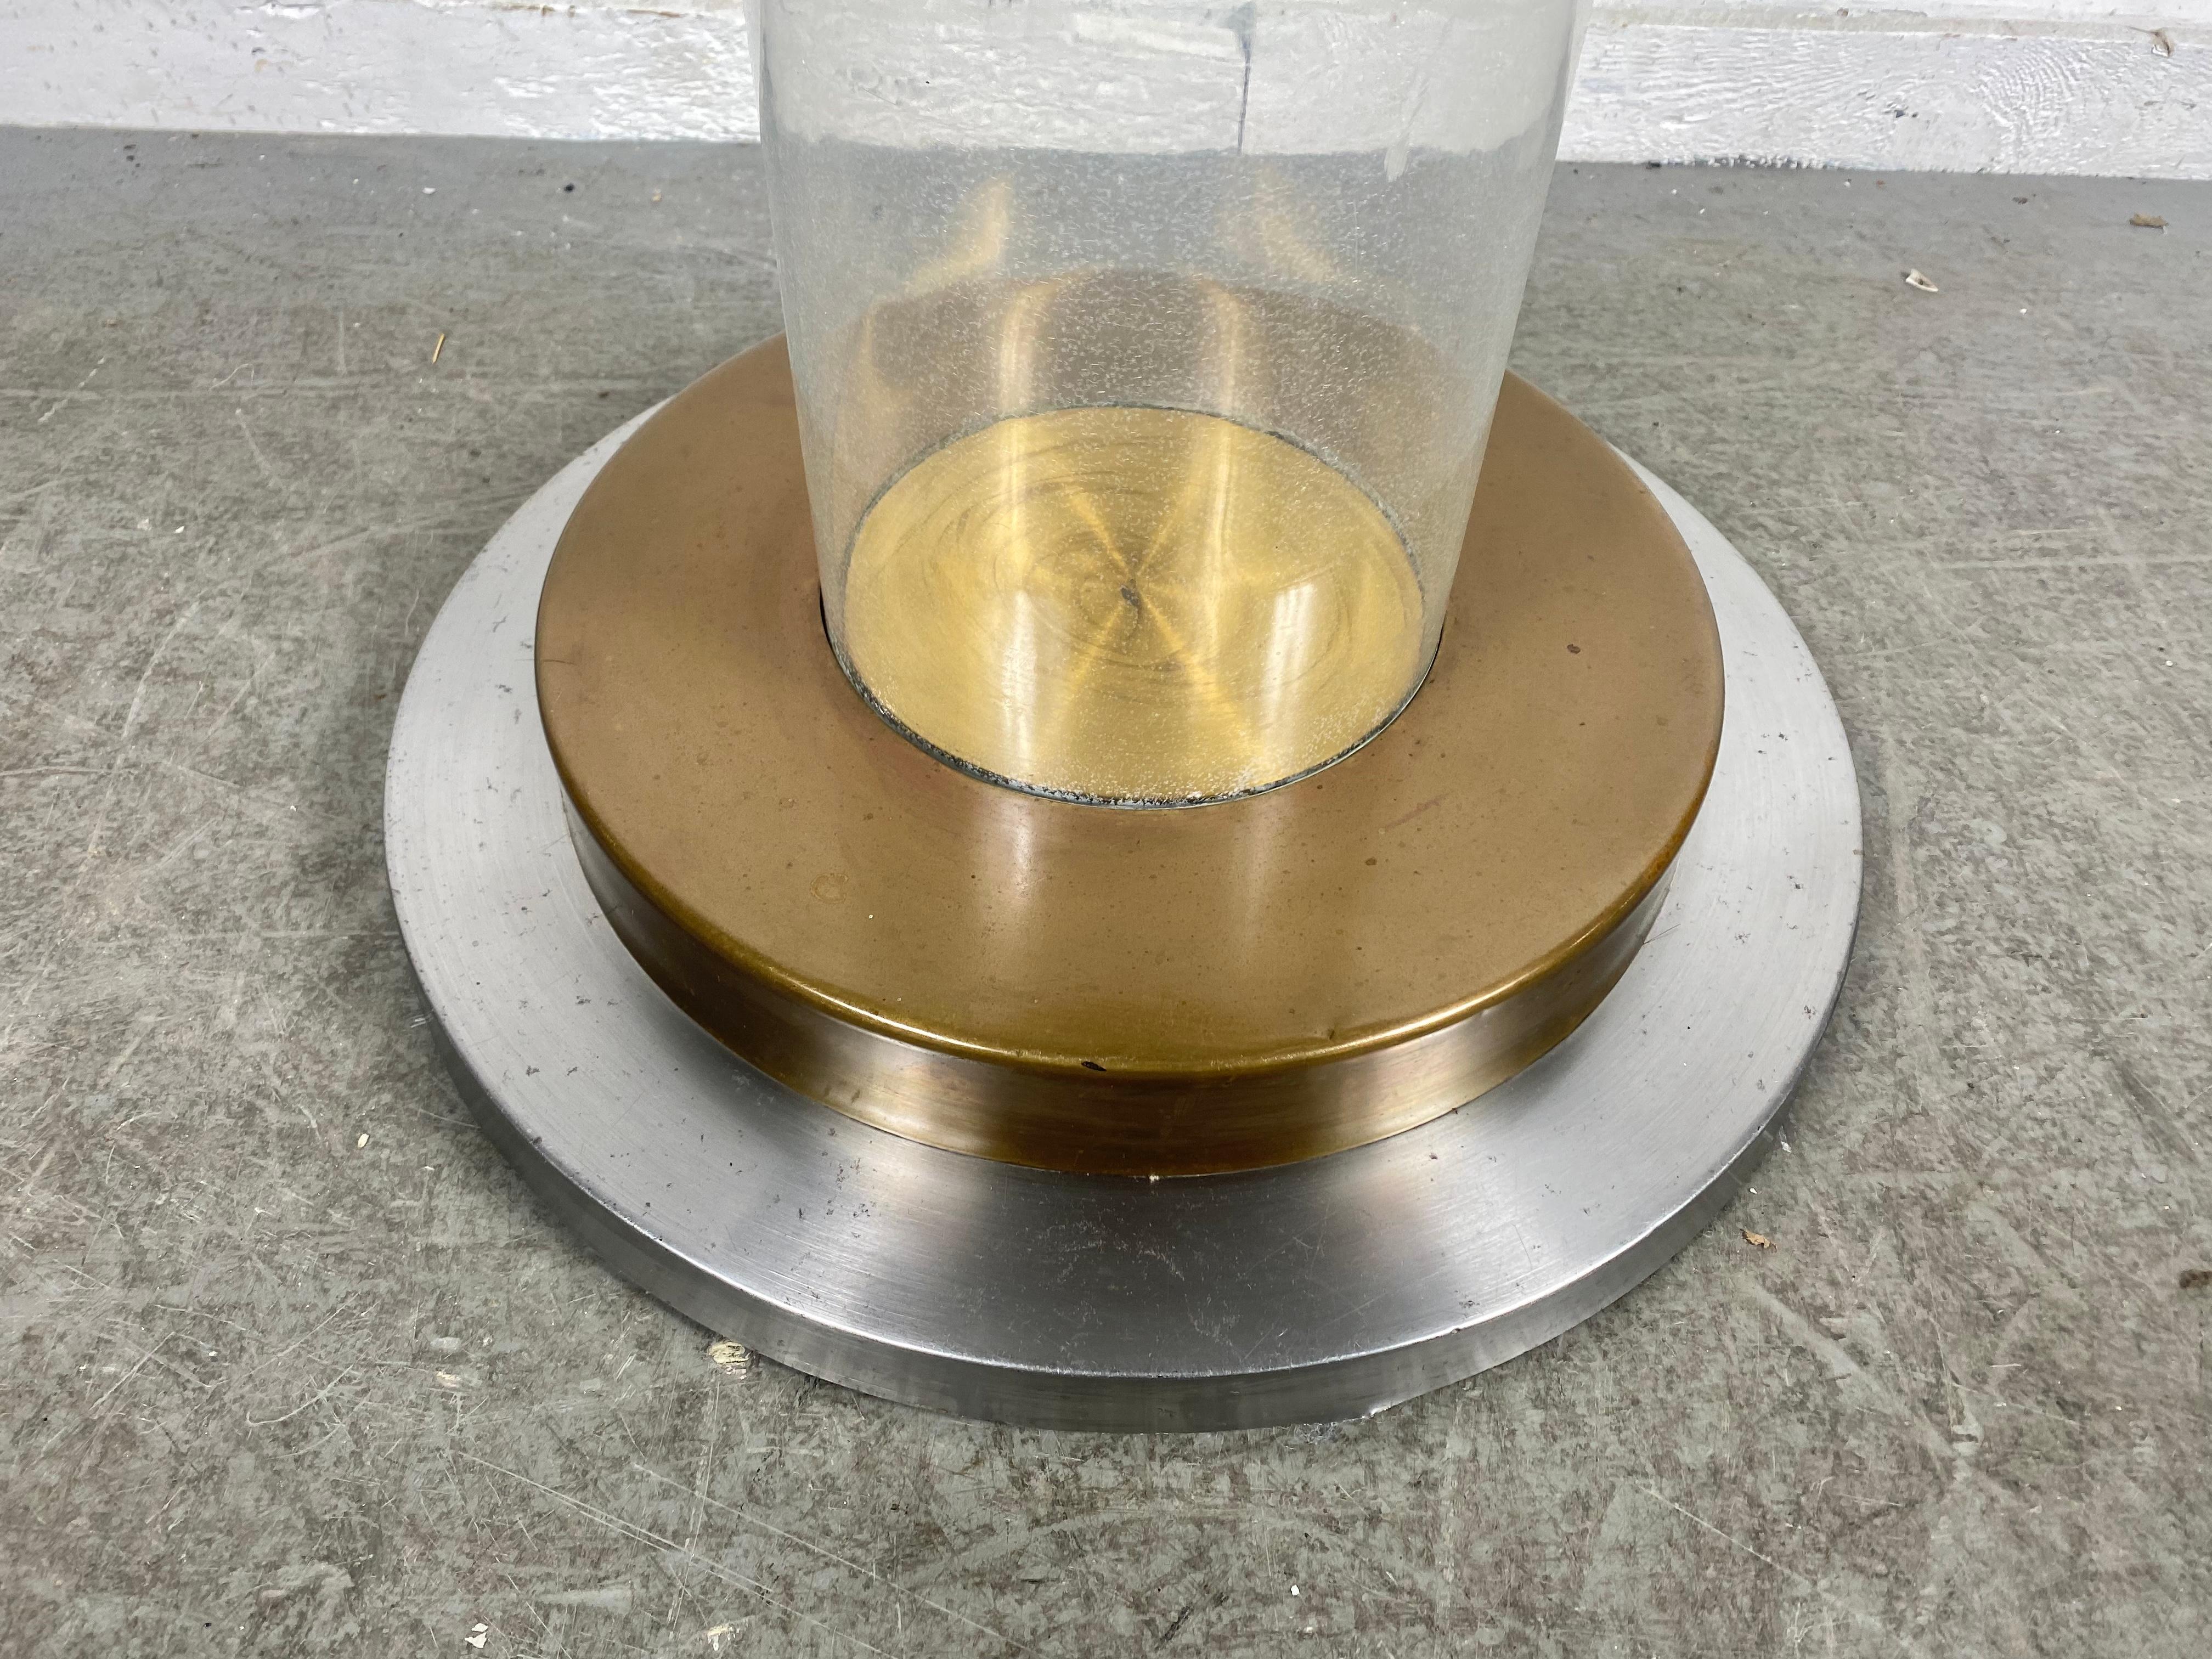 Romeo Rega Lucite / stainless / brass  Pedestal Table Base, , Italian Modernist In Good Condition For Sale In Buffalo, NY